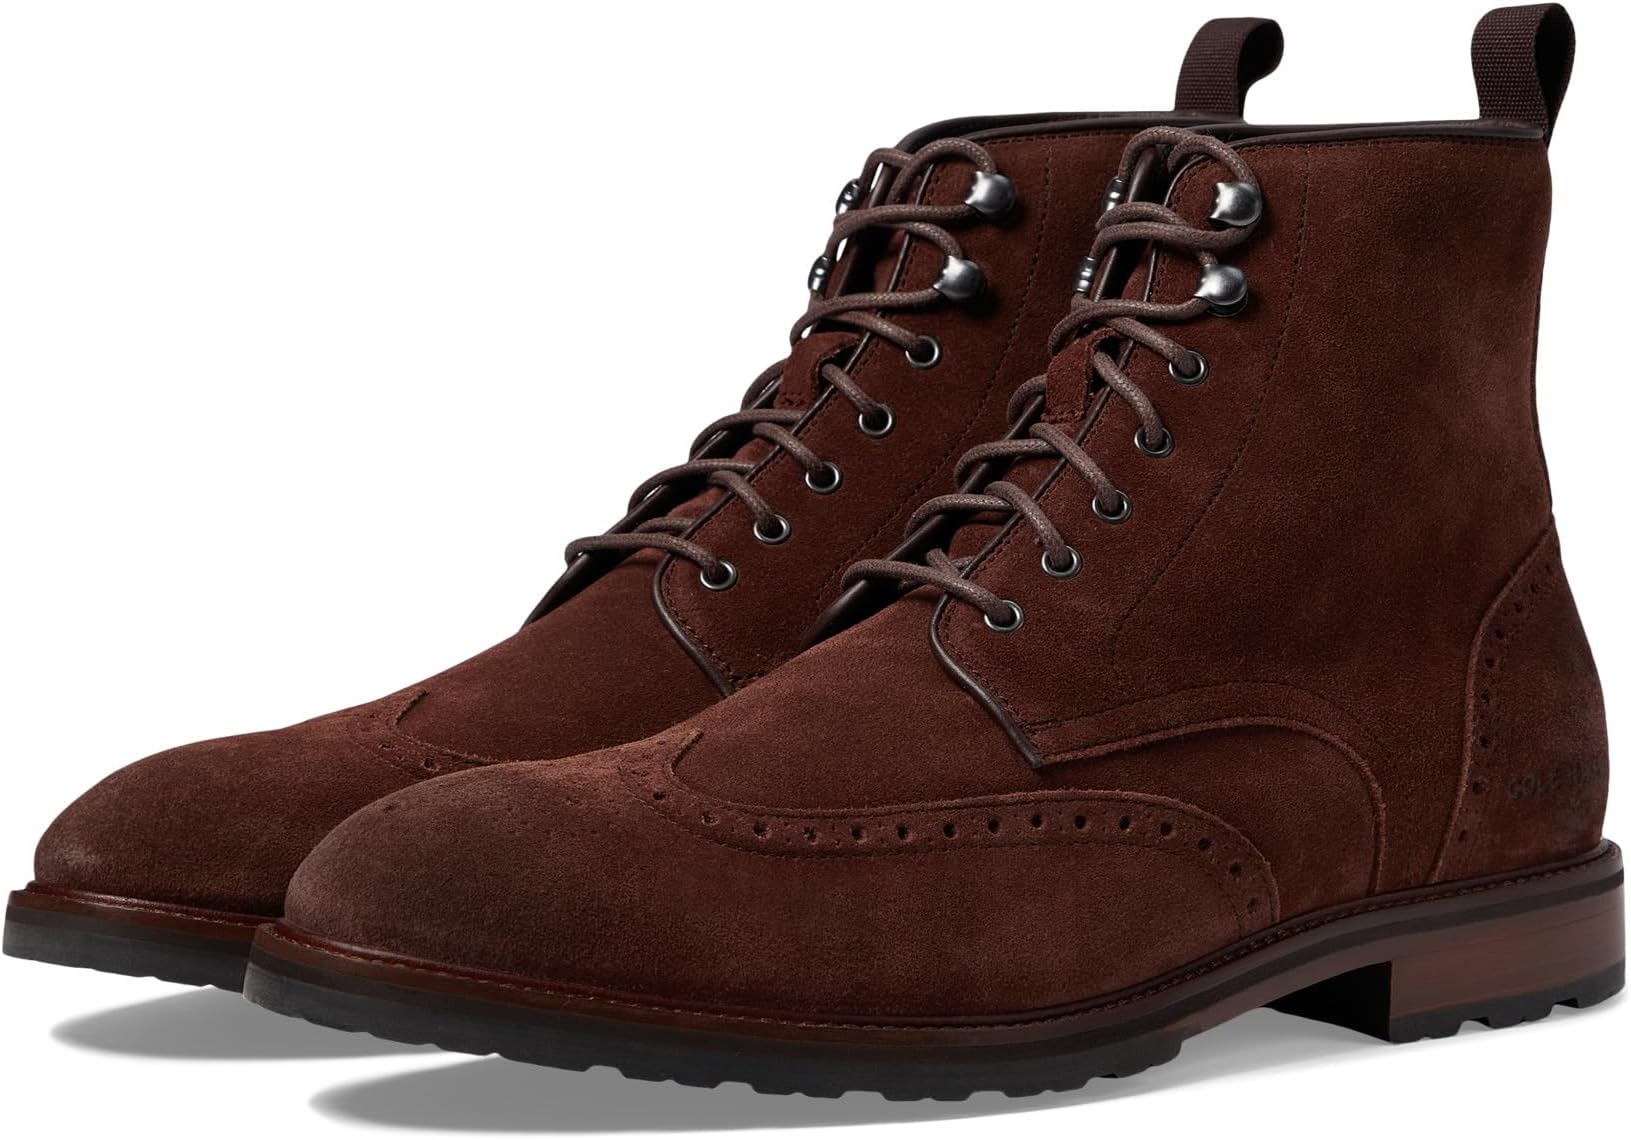 Ботинки на шнуровке Berkshire Lug Wing Tip Boot Cole Haan, цвет Madeira Suede Scot Water-Resistant colin scot colin scot remastered expanded edition